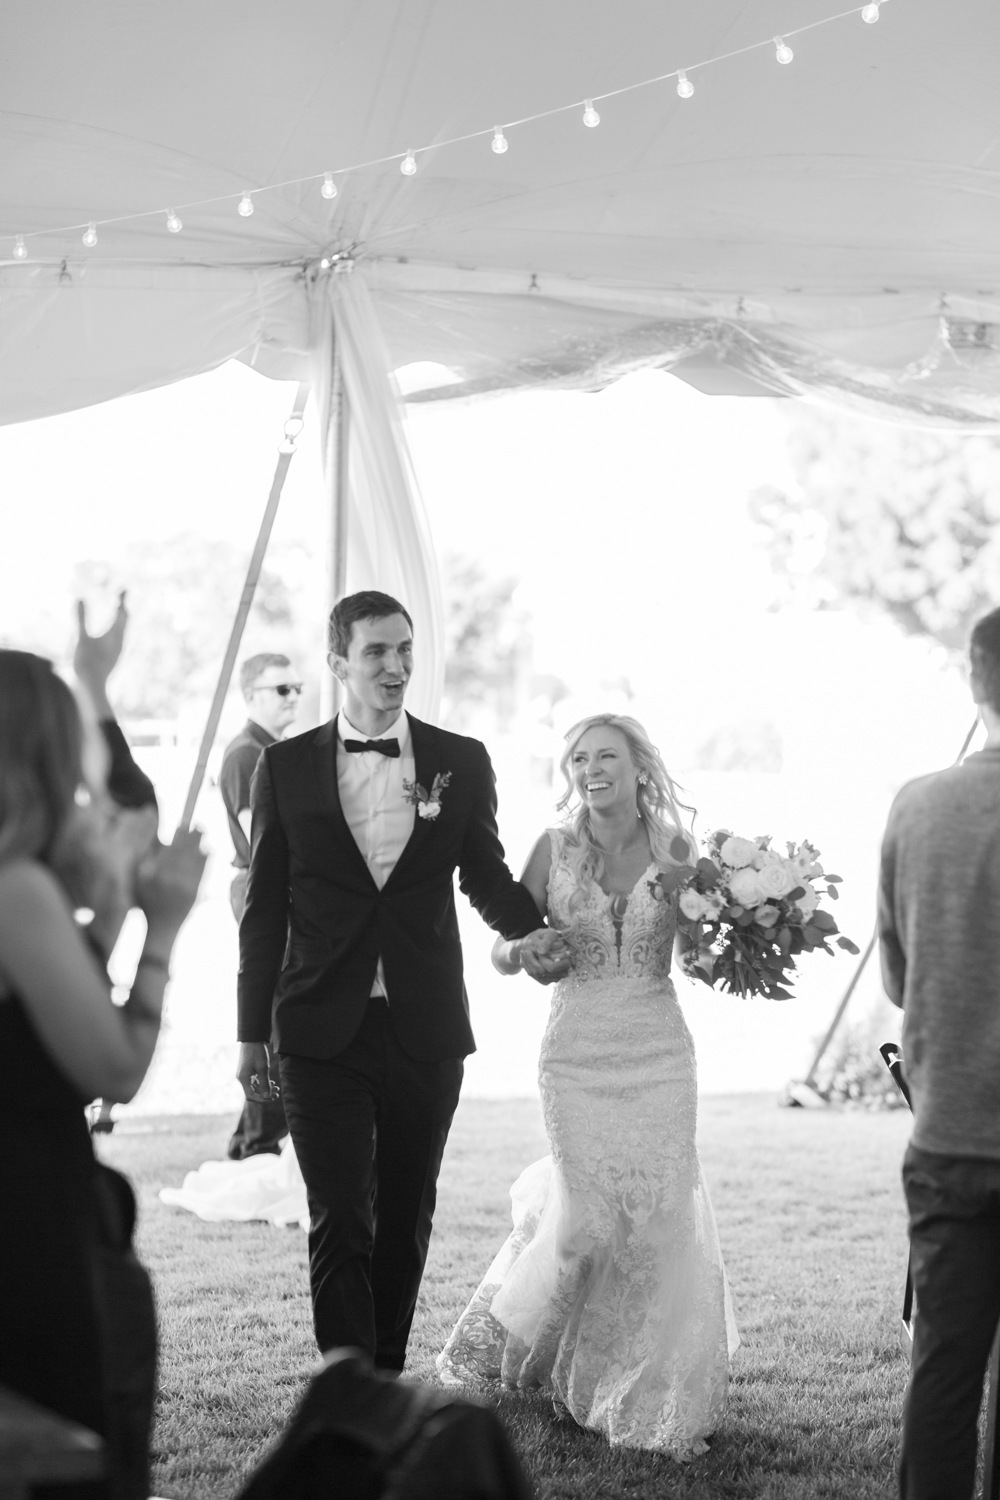 black and white photo bride and groom holding hands walking into wedding reception tent smiling guests clapping in background